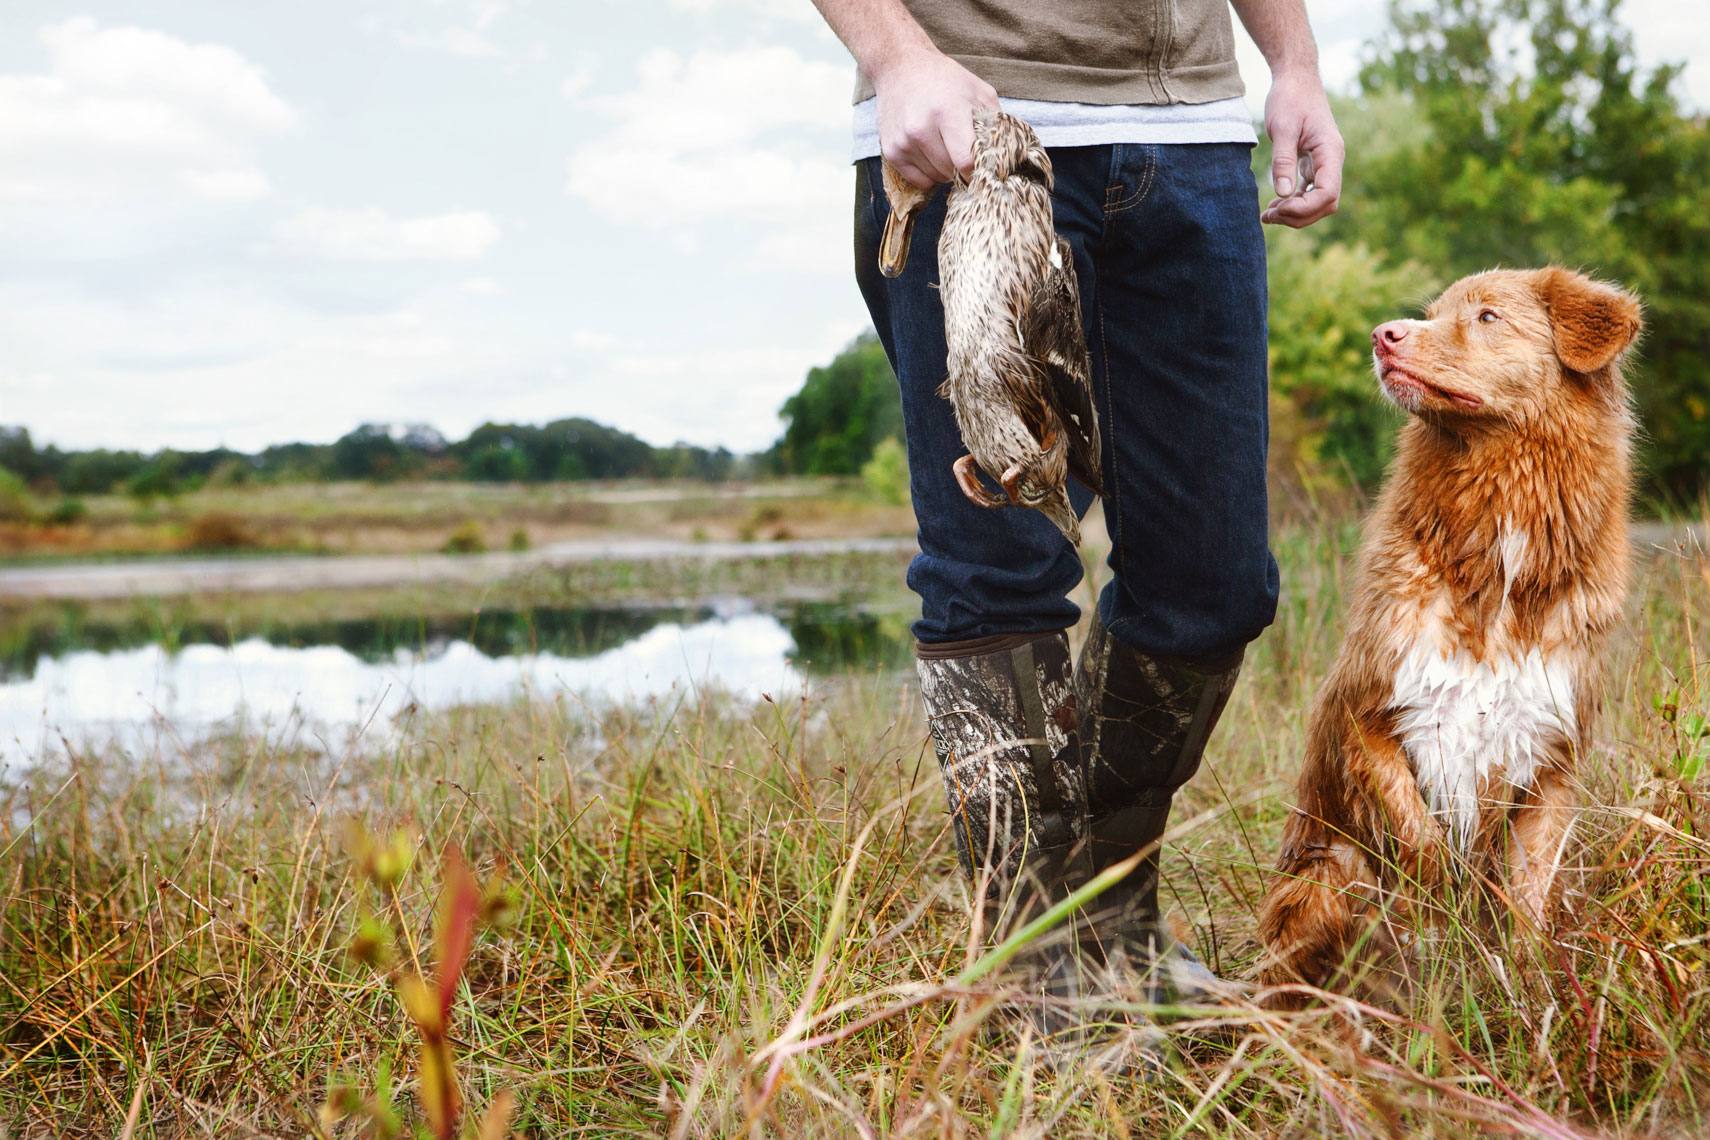 Nova Scotia Duck Tolling Retriever with his owner hunting fowl